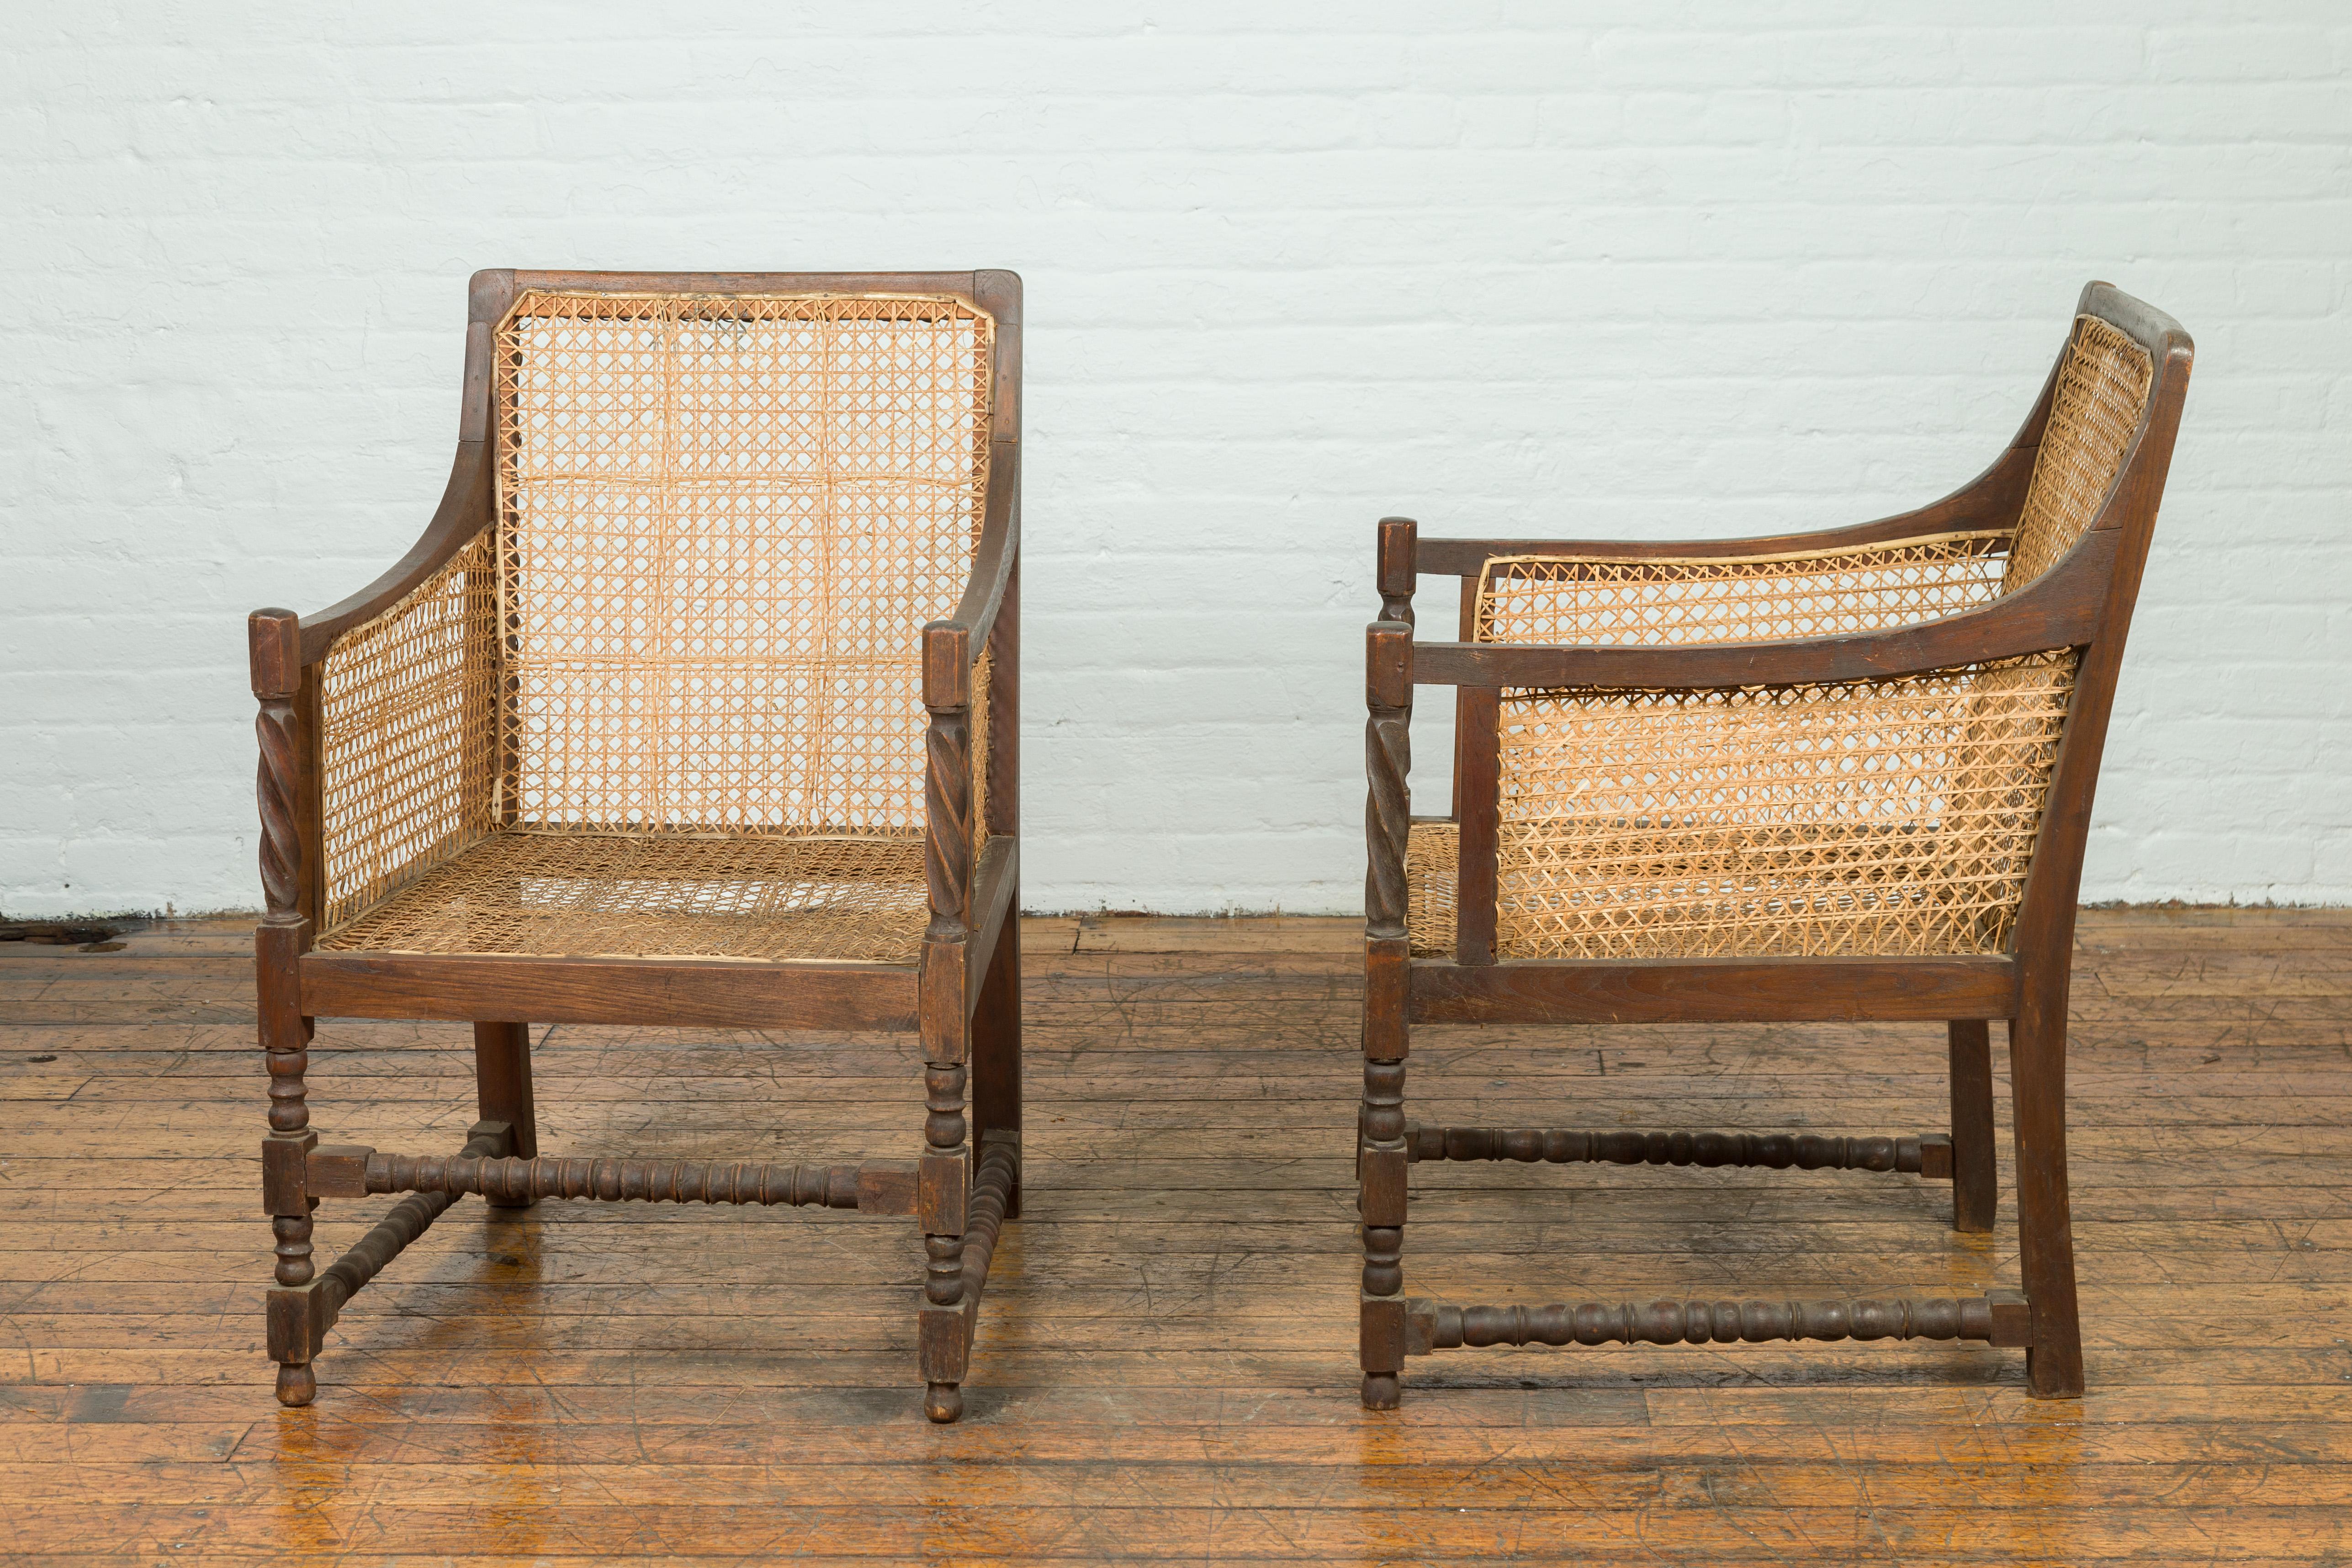 Pair of Antique Rustic Thai Turned Wood Armchairs with Rattan Backs and Seats 10